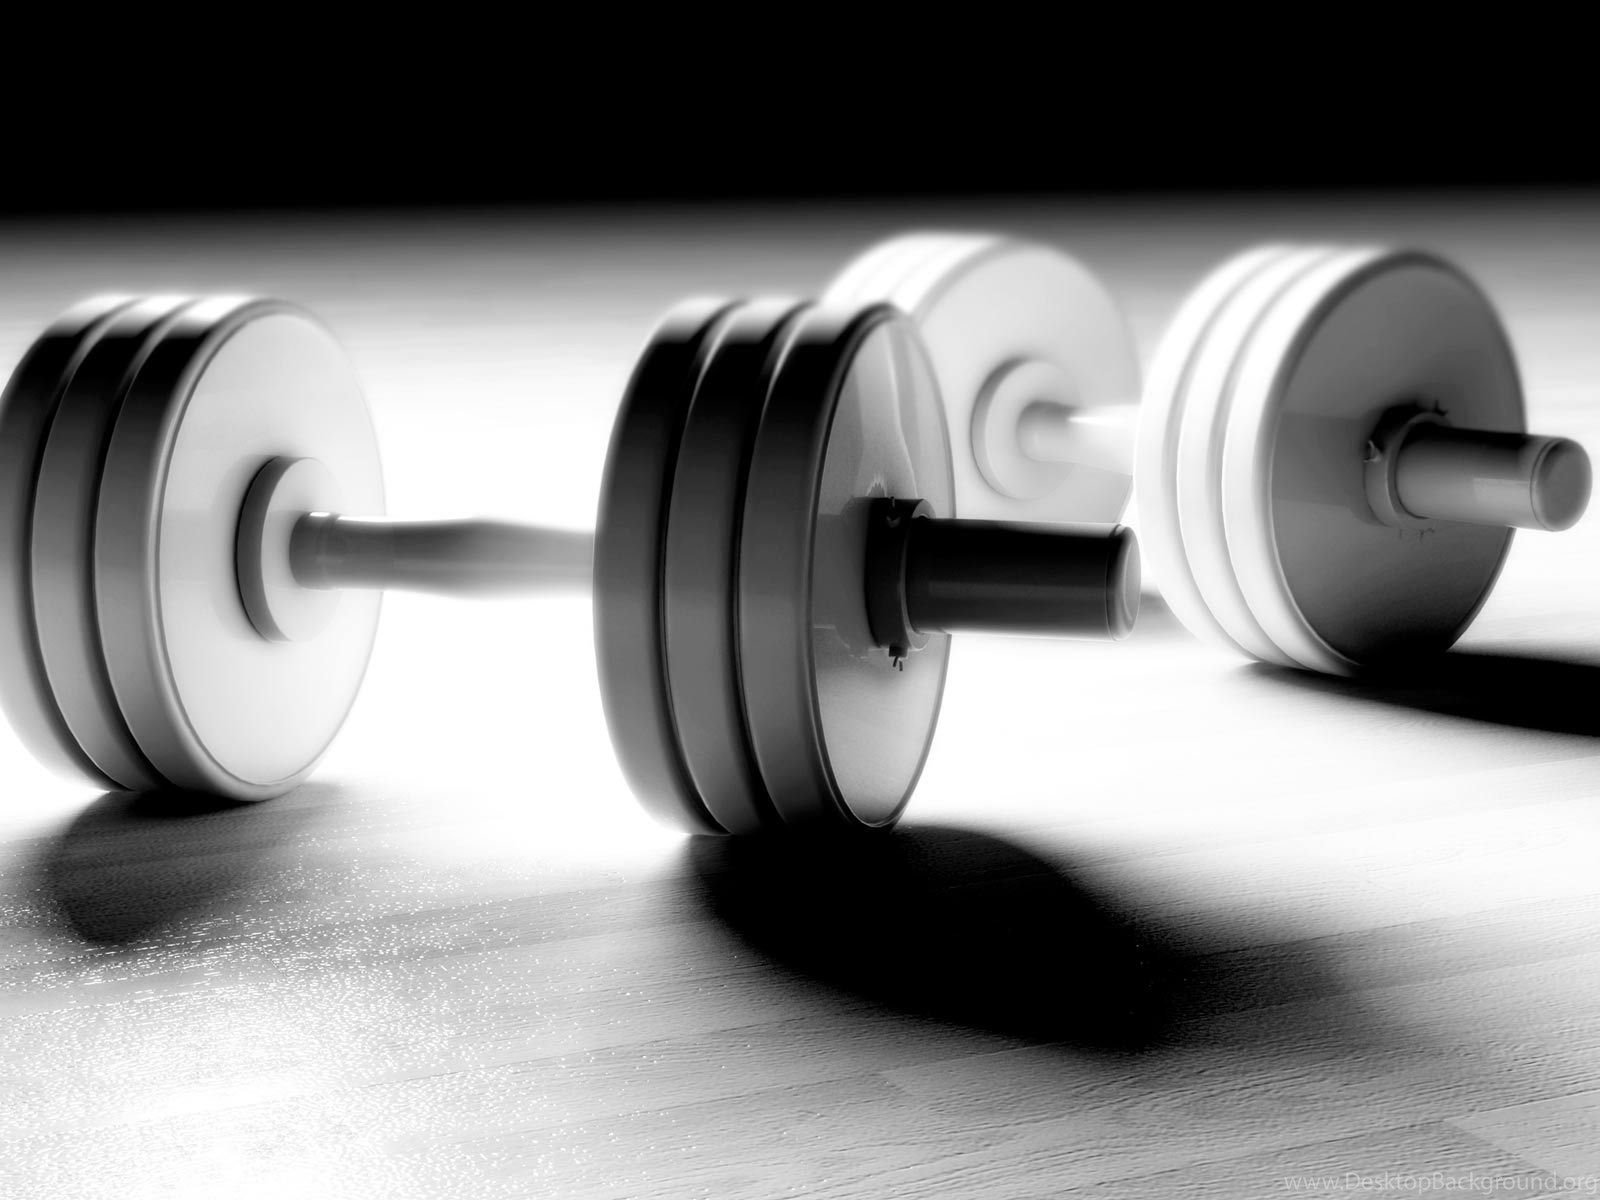 Pic > Health And Fitness Wallpaper Desktop Background